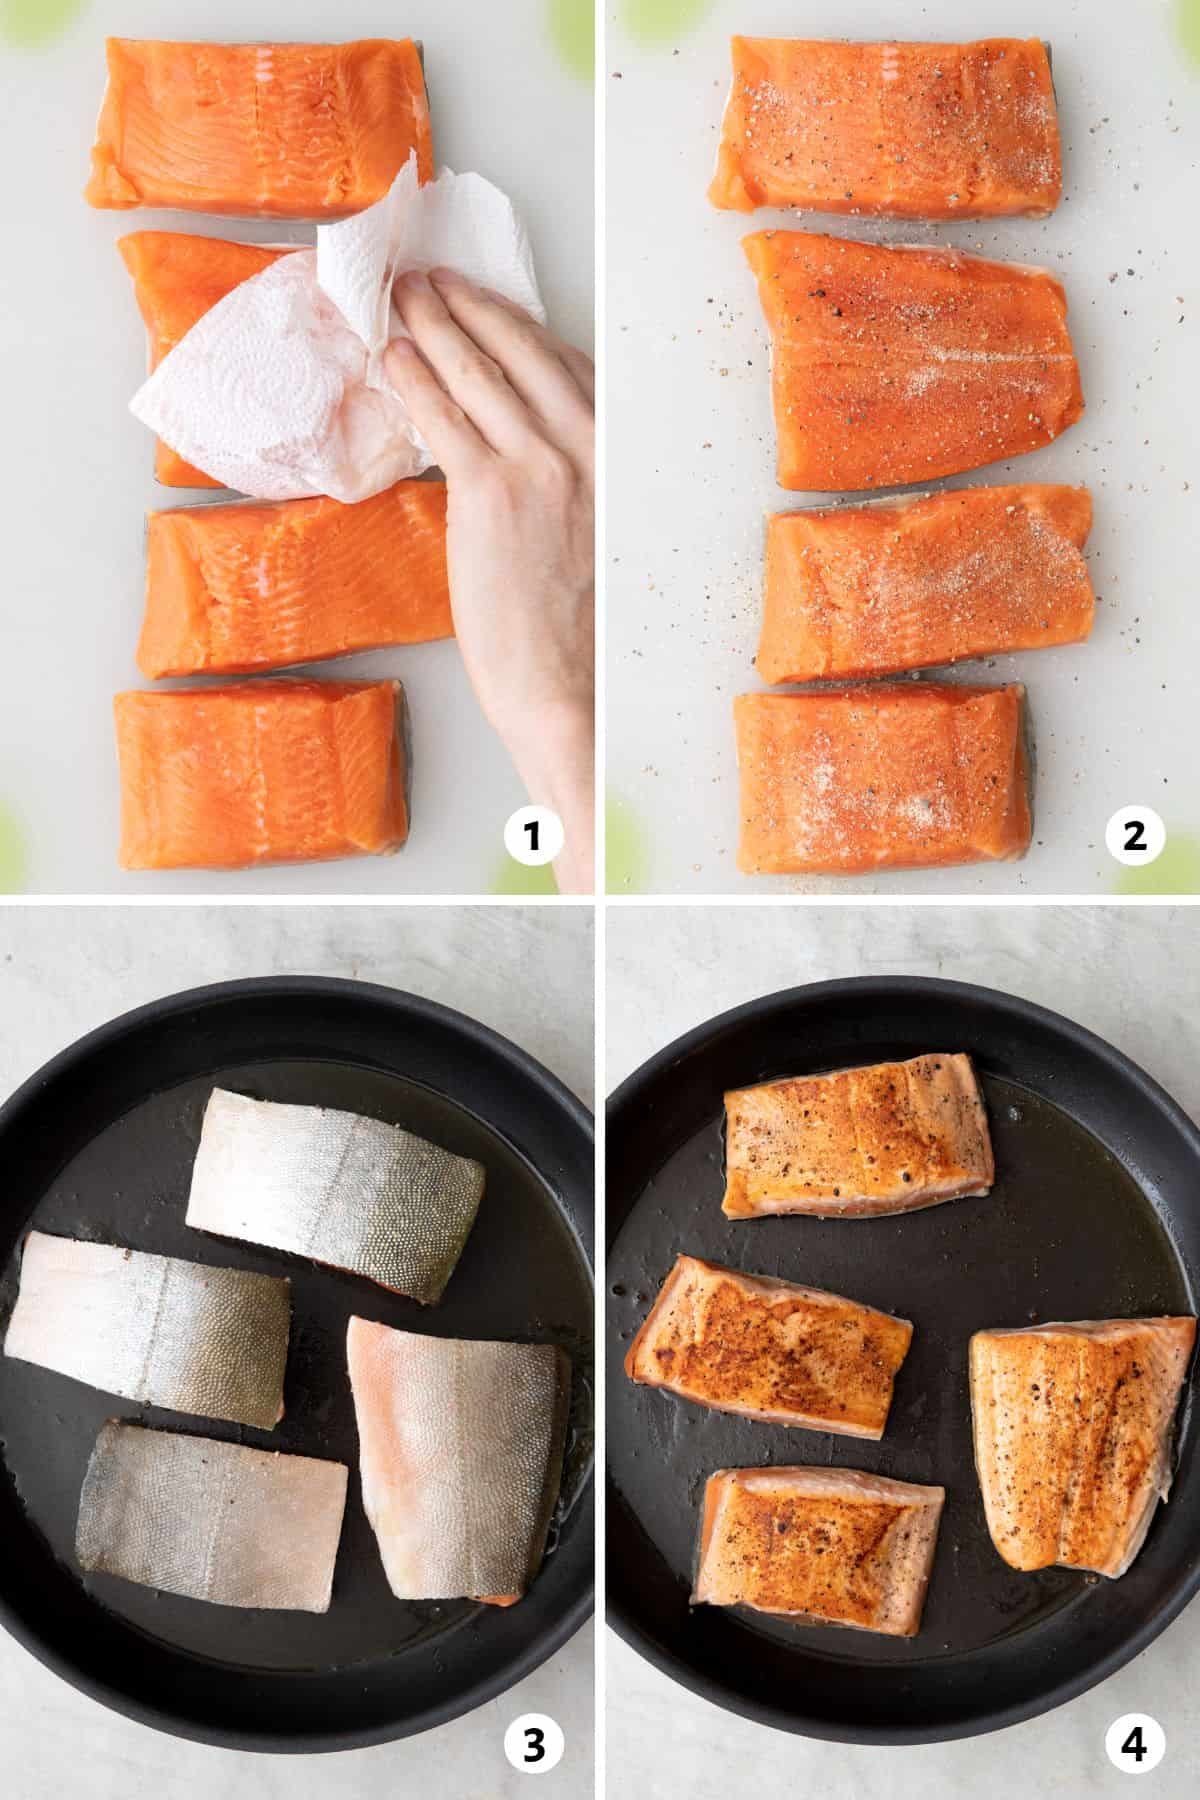 4 image collage making recipe: 1- pat fish dry, 2- season salmon, 3- place filets flesh side down in oiled pan, 4- flipped filets to show seared flesh.